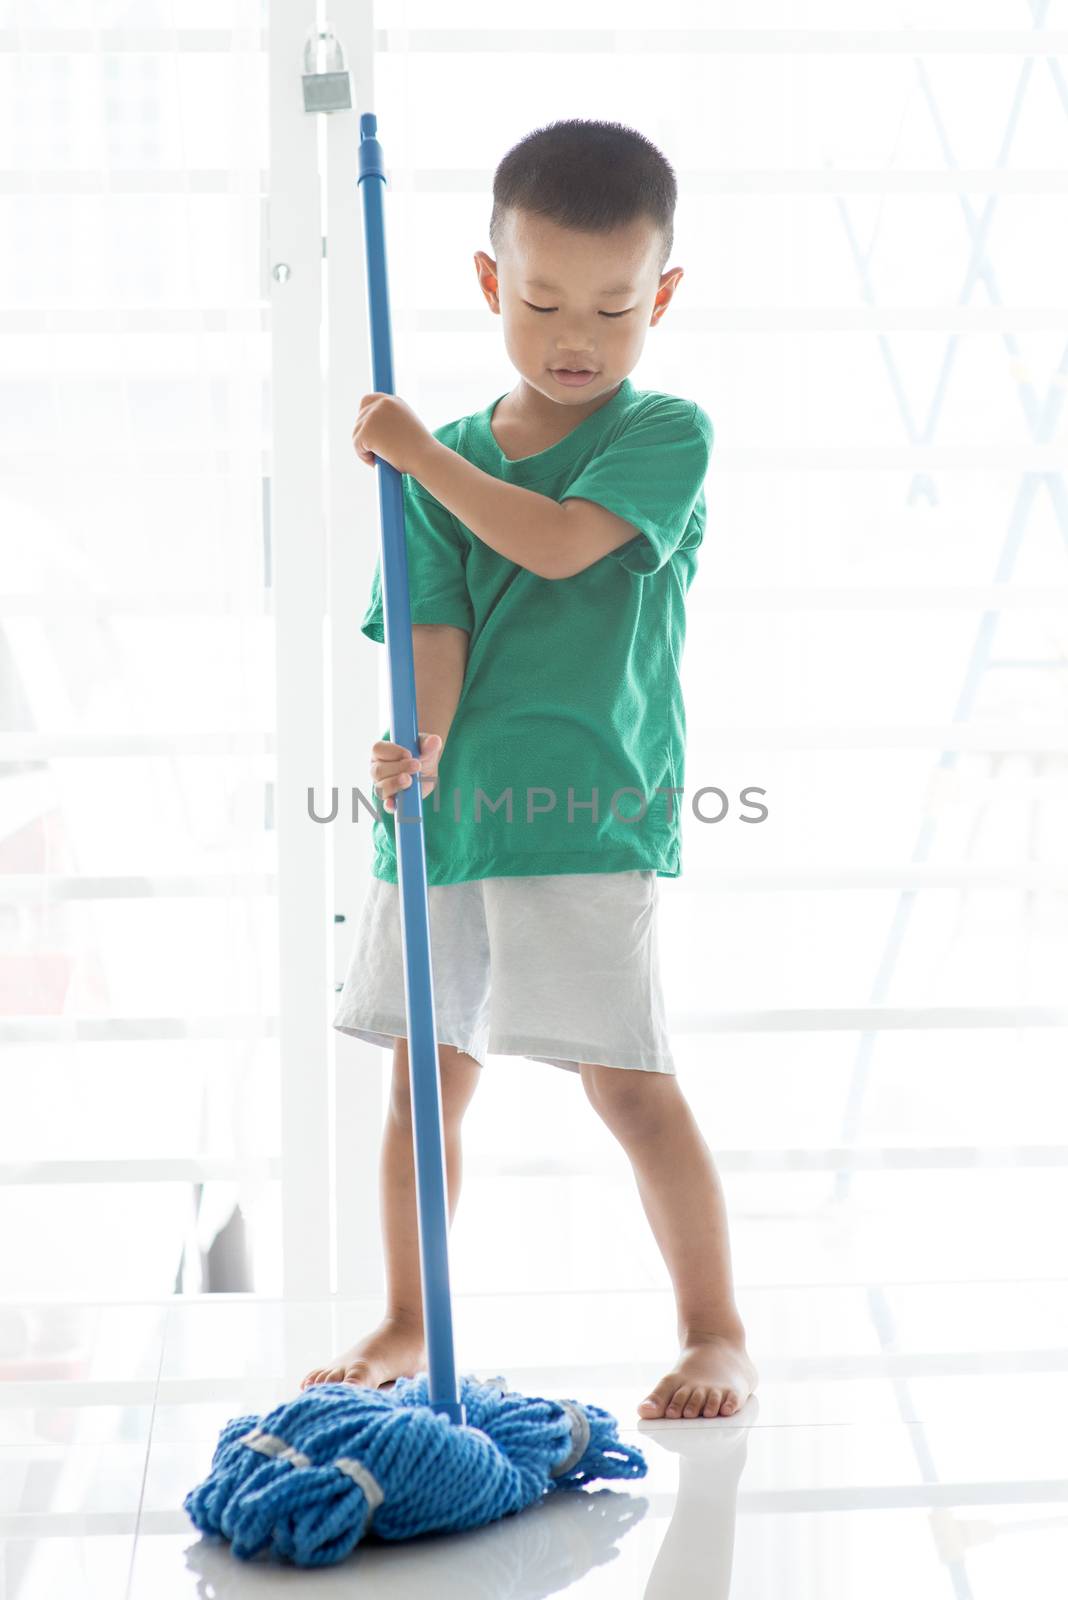 Asian boy mopping floor. Young child doing house chores at home.